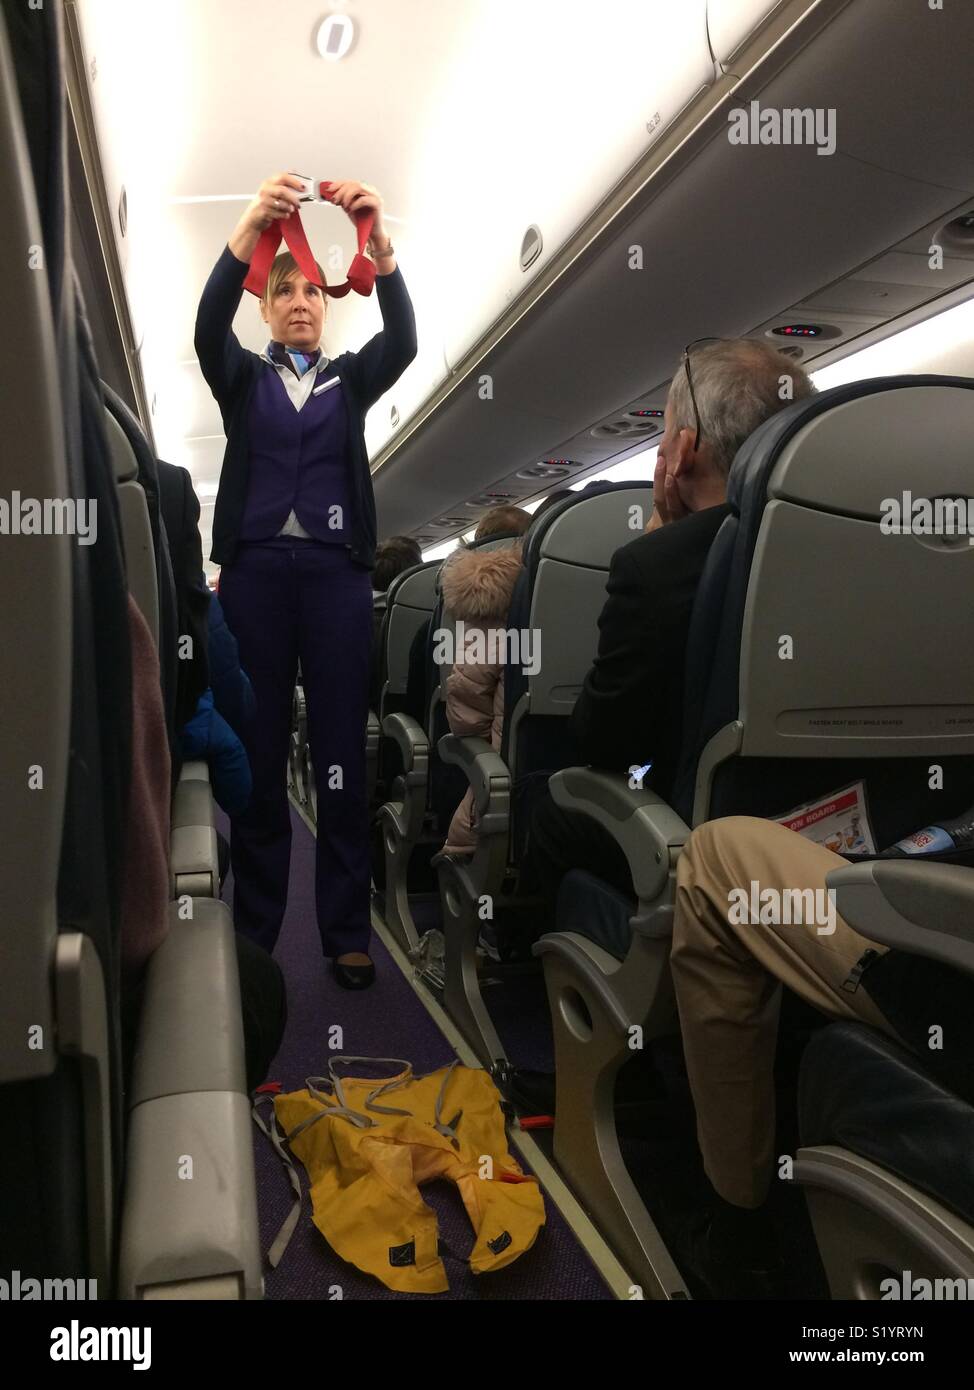 Cabin crew member giving the obligatory pre- flight safety demonstration on a Flybe Embraer 195 aircraft. She hold up a lap belt to demonstrate how it is fastened and unfastened. Stock Photo